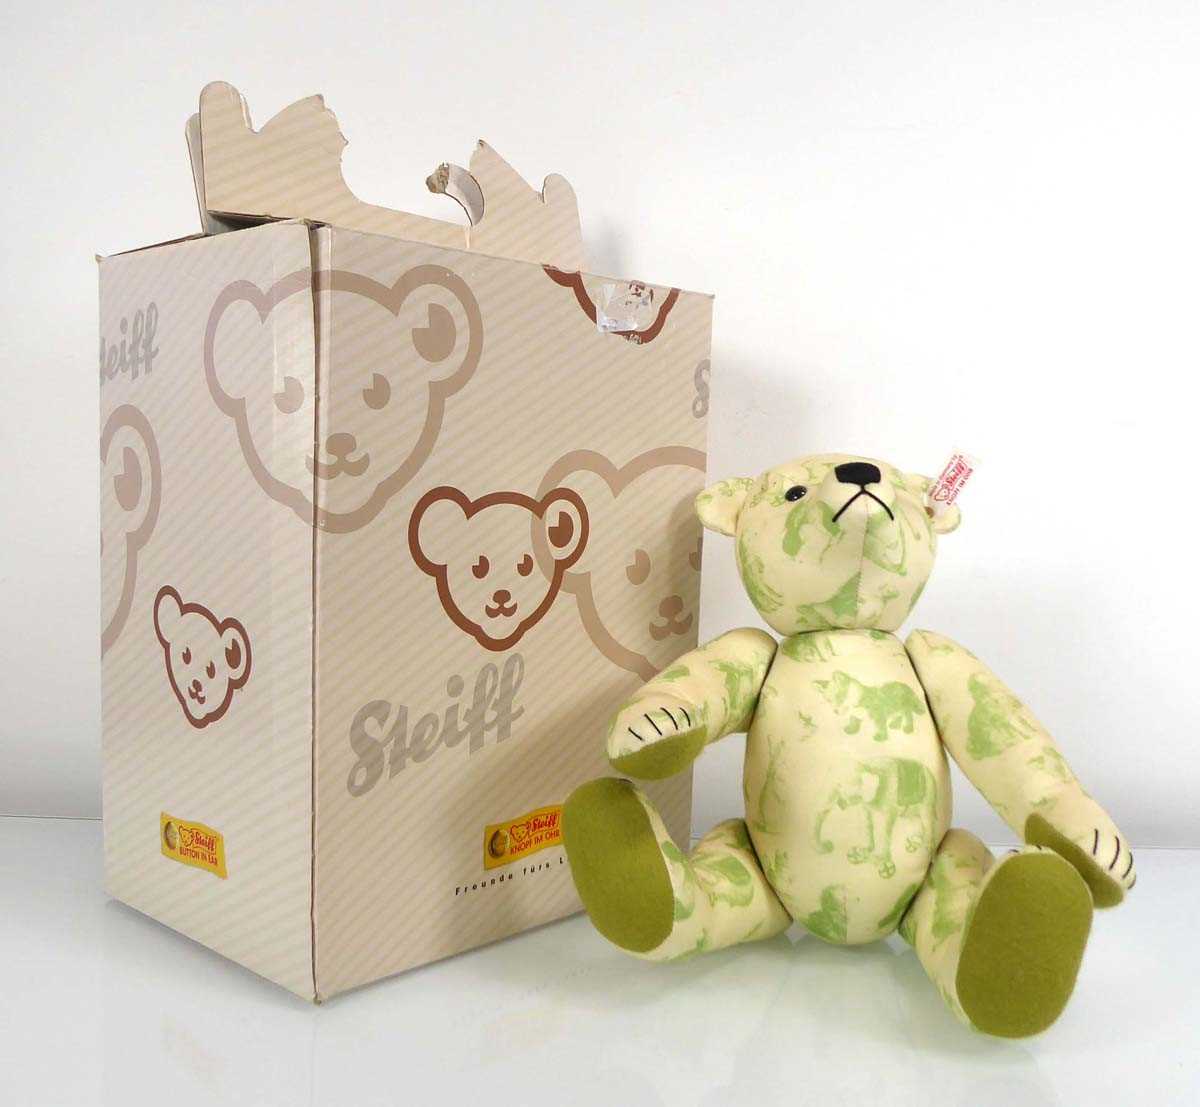 A limited edition fully jointed Steiff bear in pale green printed fabric, boxed